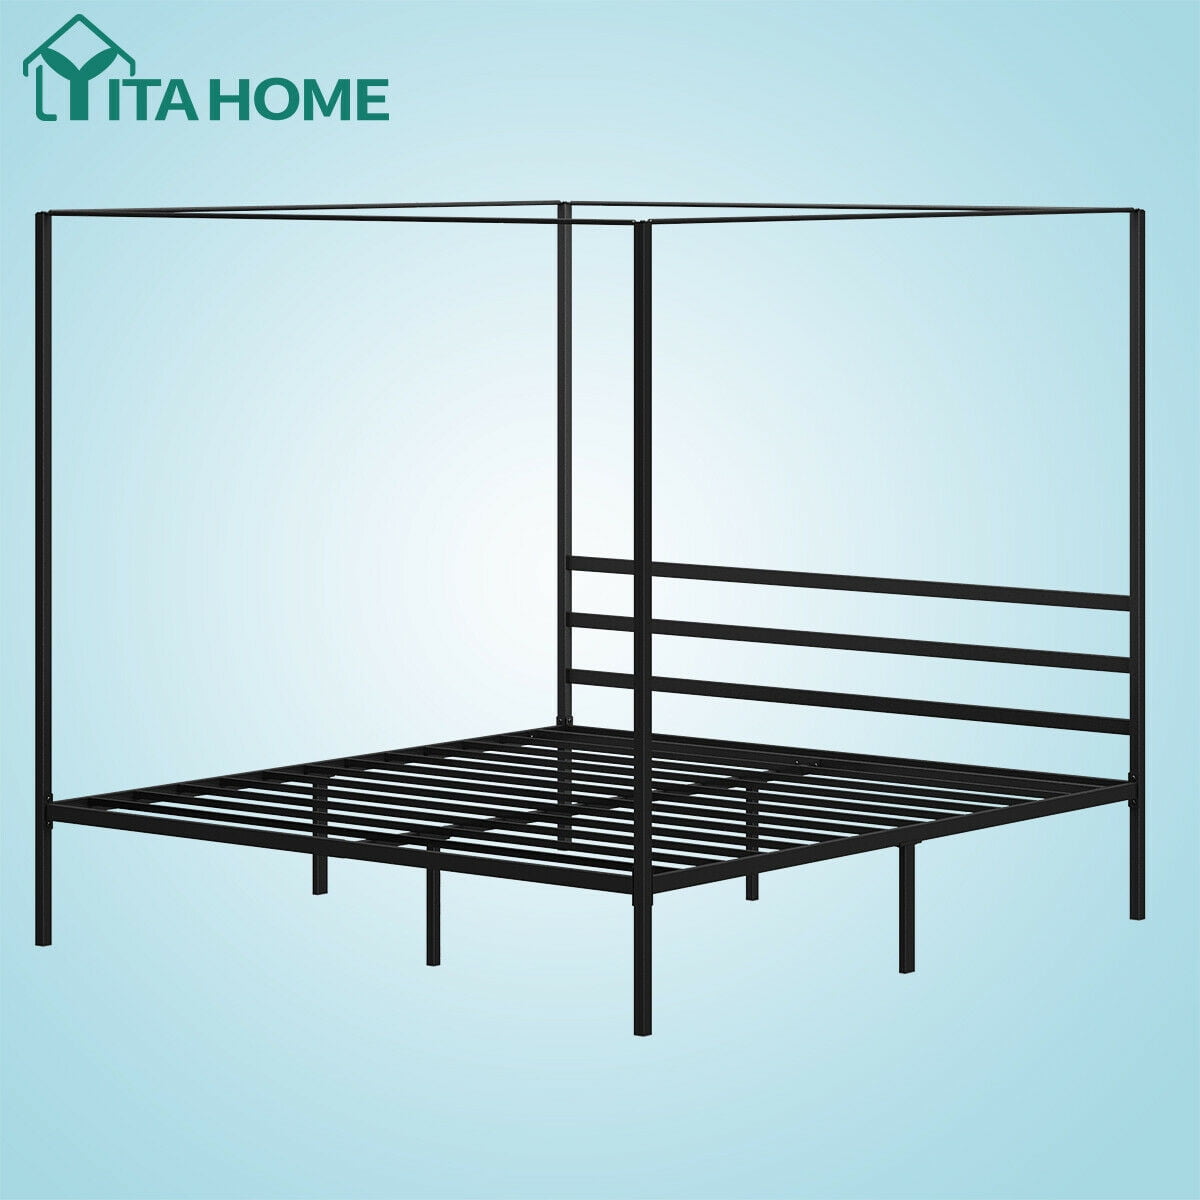 Yitahome Metal Canopy Bed Platform Four, King Size Metal Canopy Bed Frame